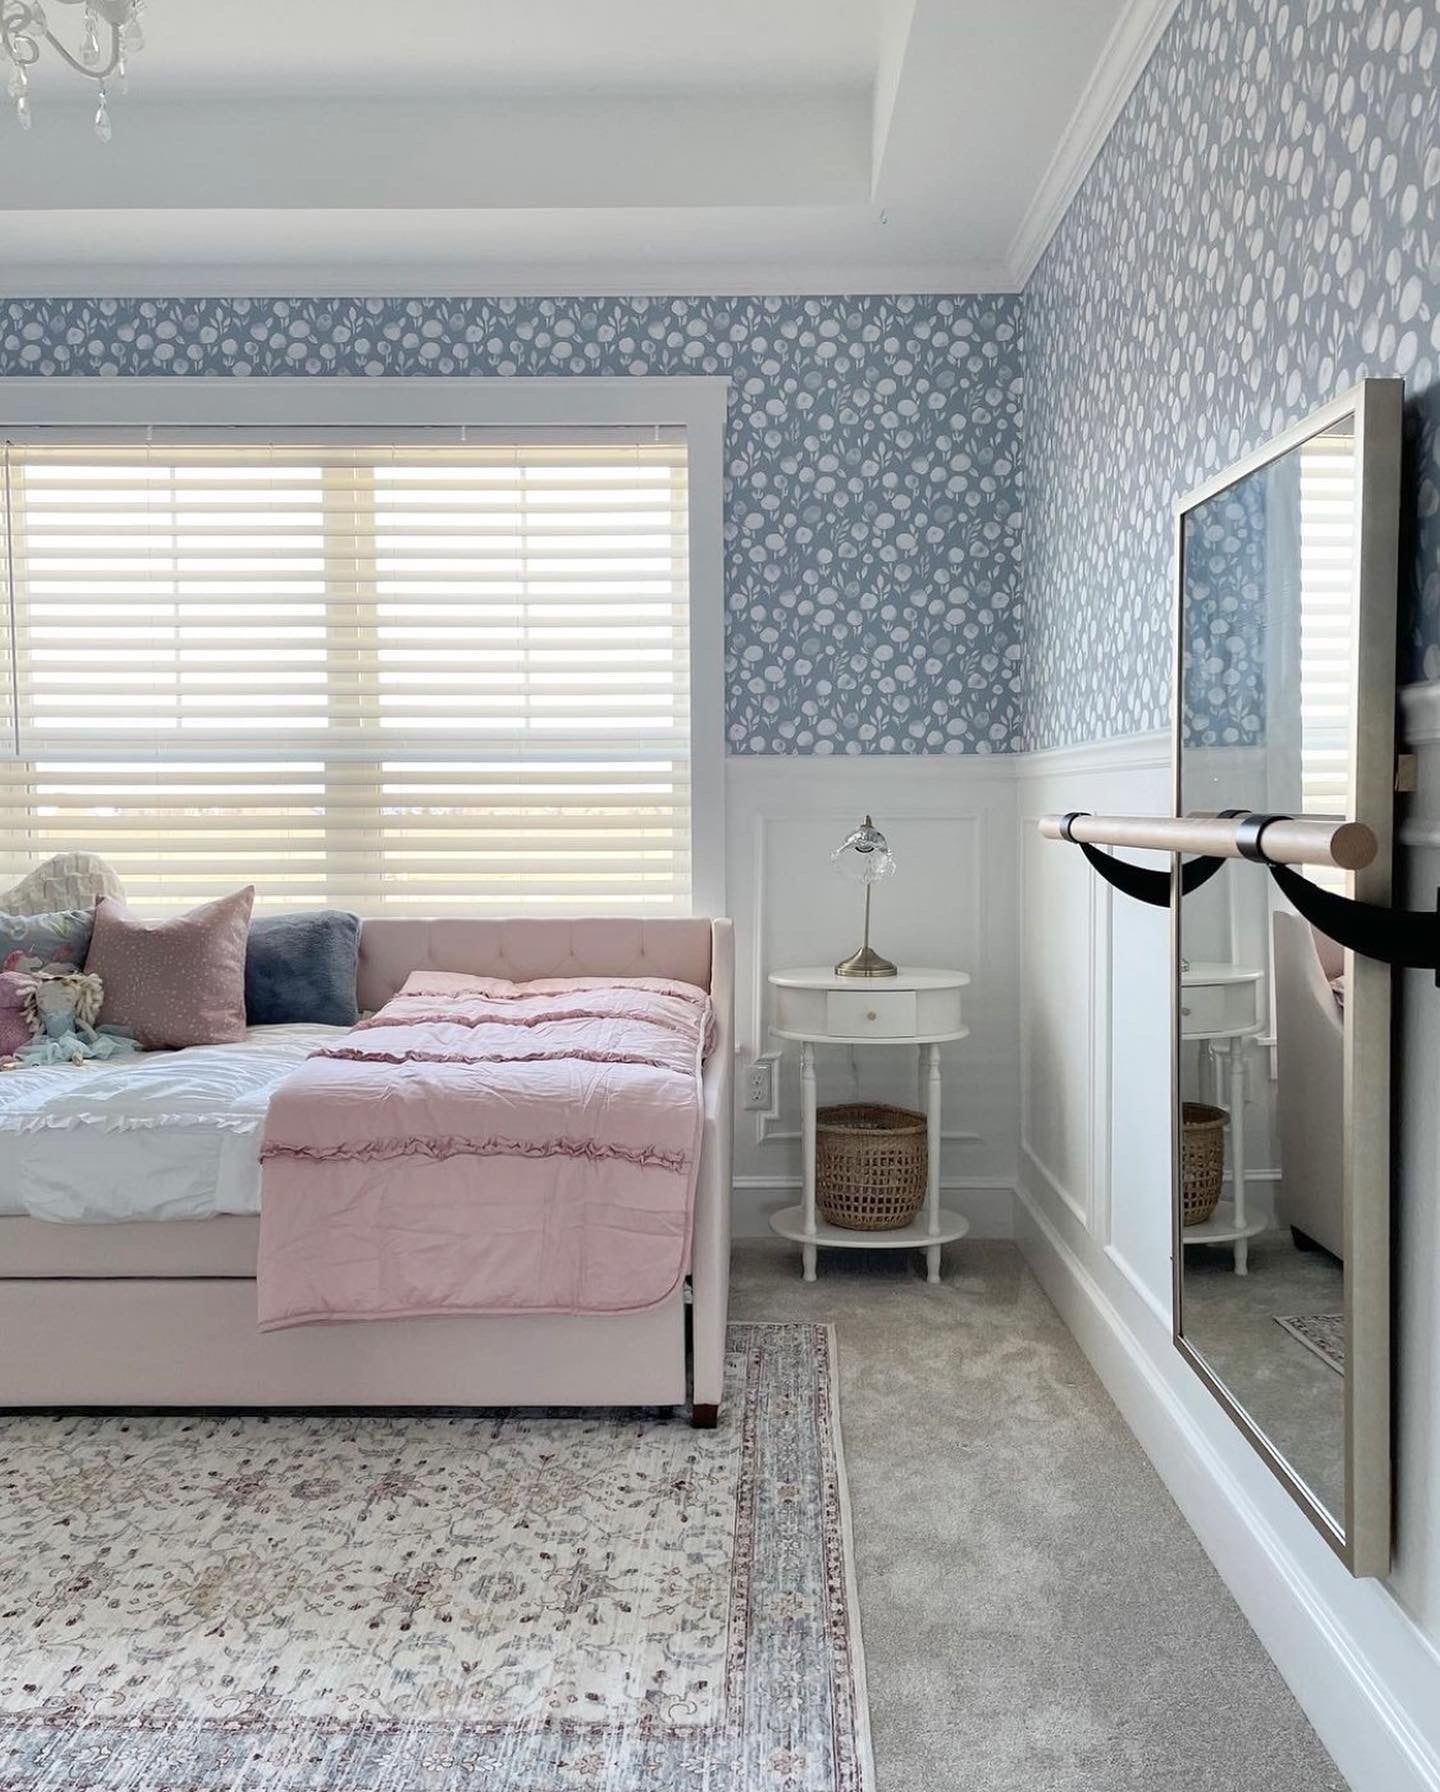 A light and airy bedroom with 'Subtle Botanica II - Inverted' wallpaper featuring a soothing pattern of white botanical silhouettes against a soft blue-grey background. The room is elegantly styled with a blush pink upholstered bed, a white bedside table, and a patterned rug, enhancing the serene aesthetic.